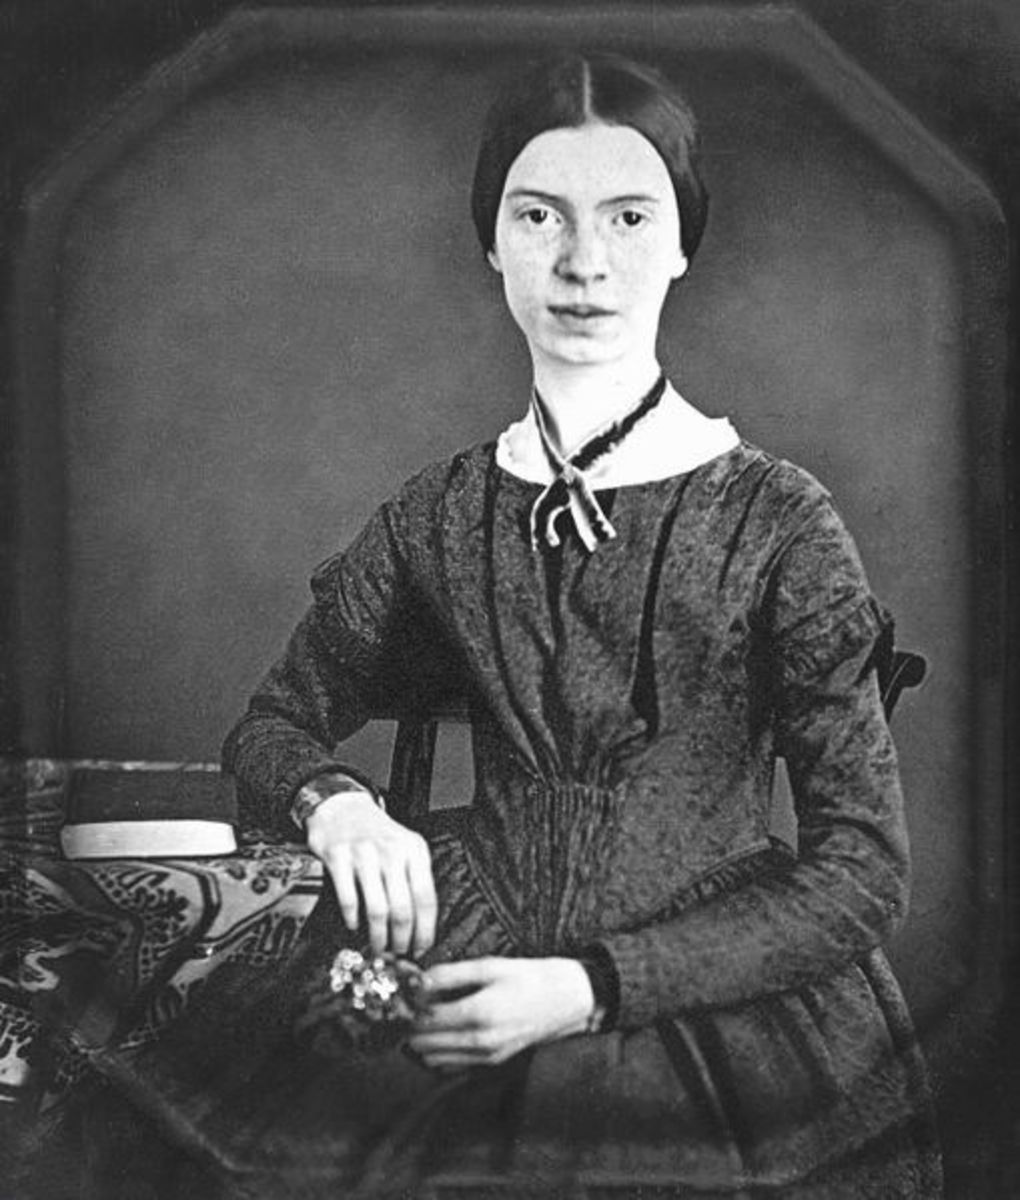 Emily Dickinson - daguerrotype at age 17